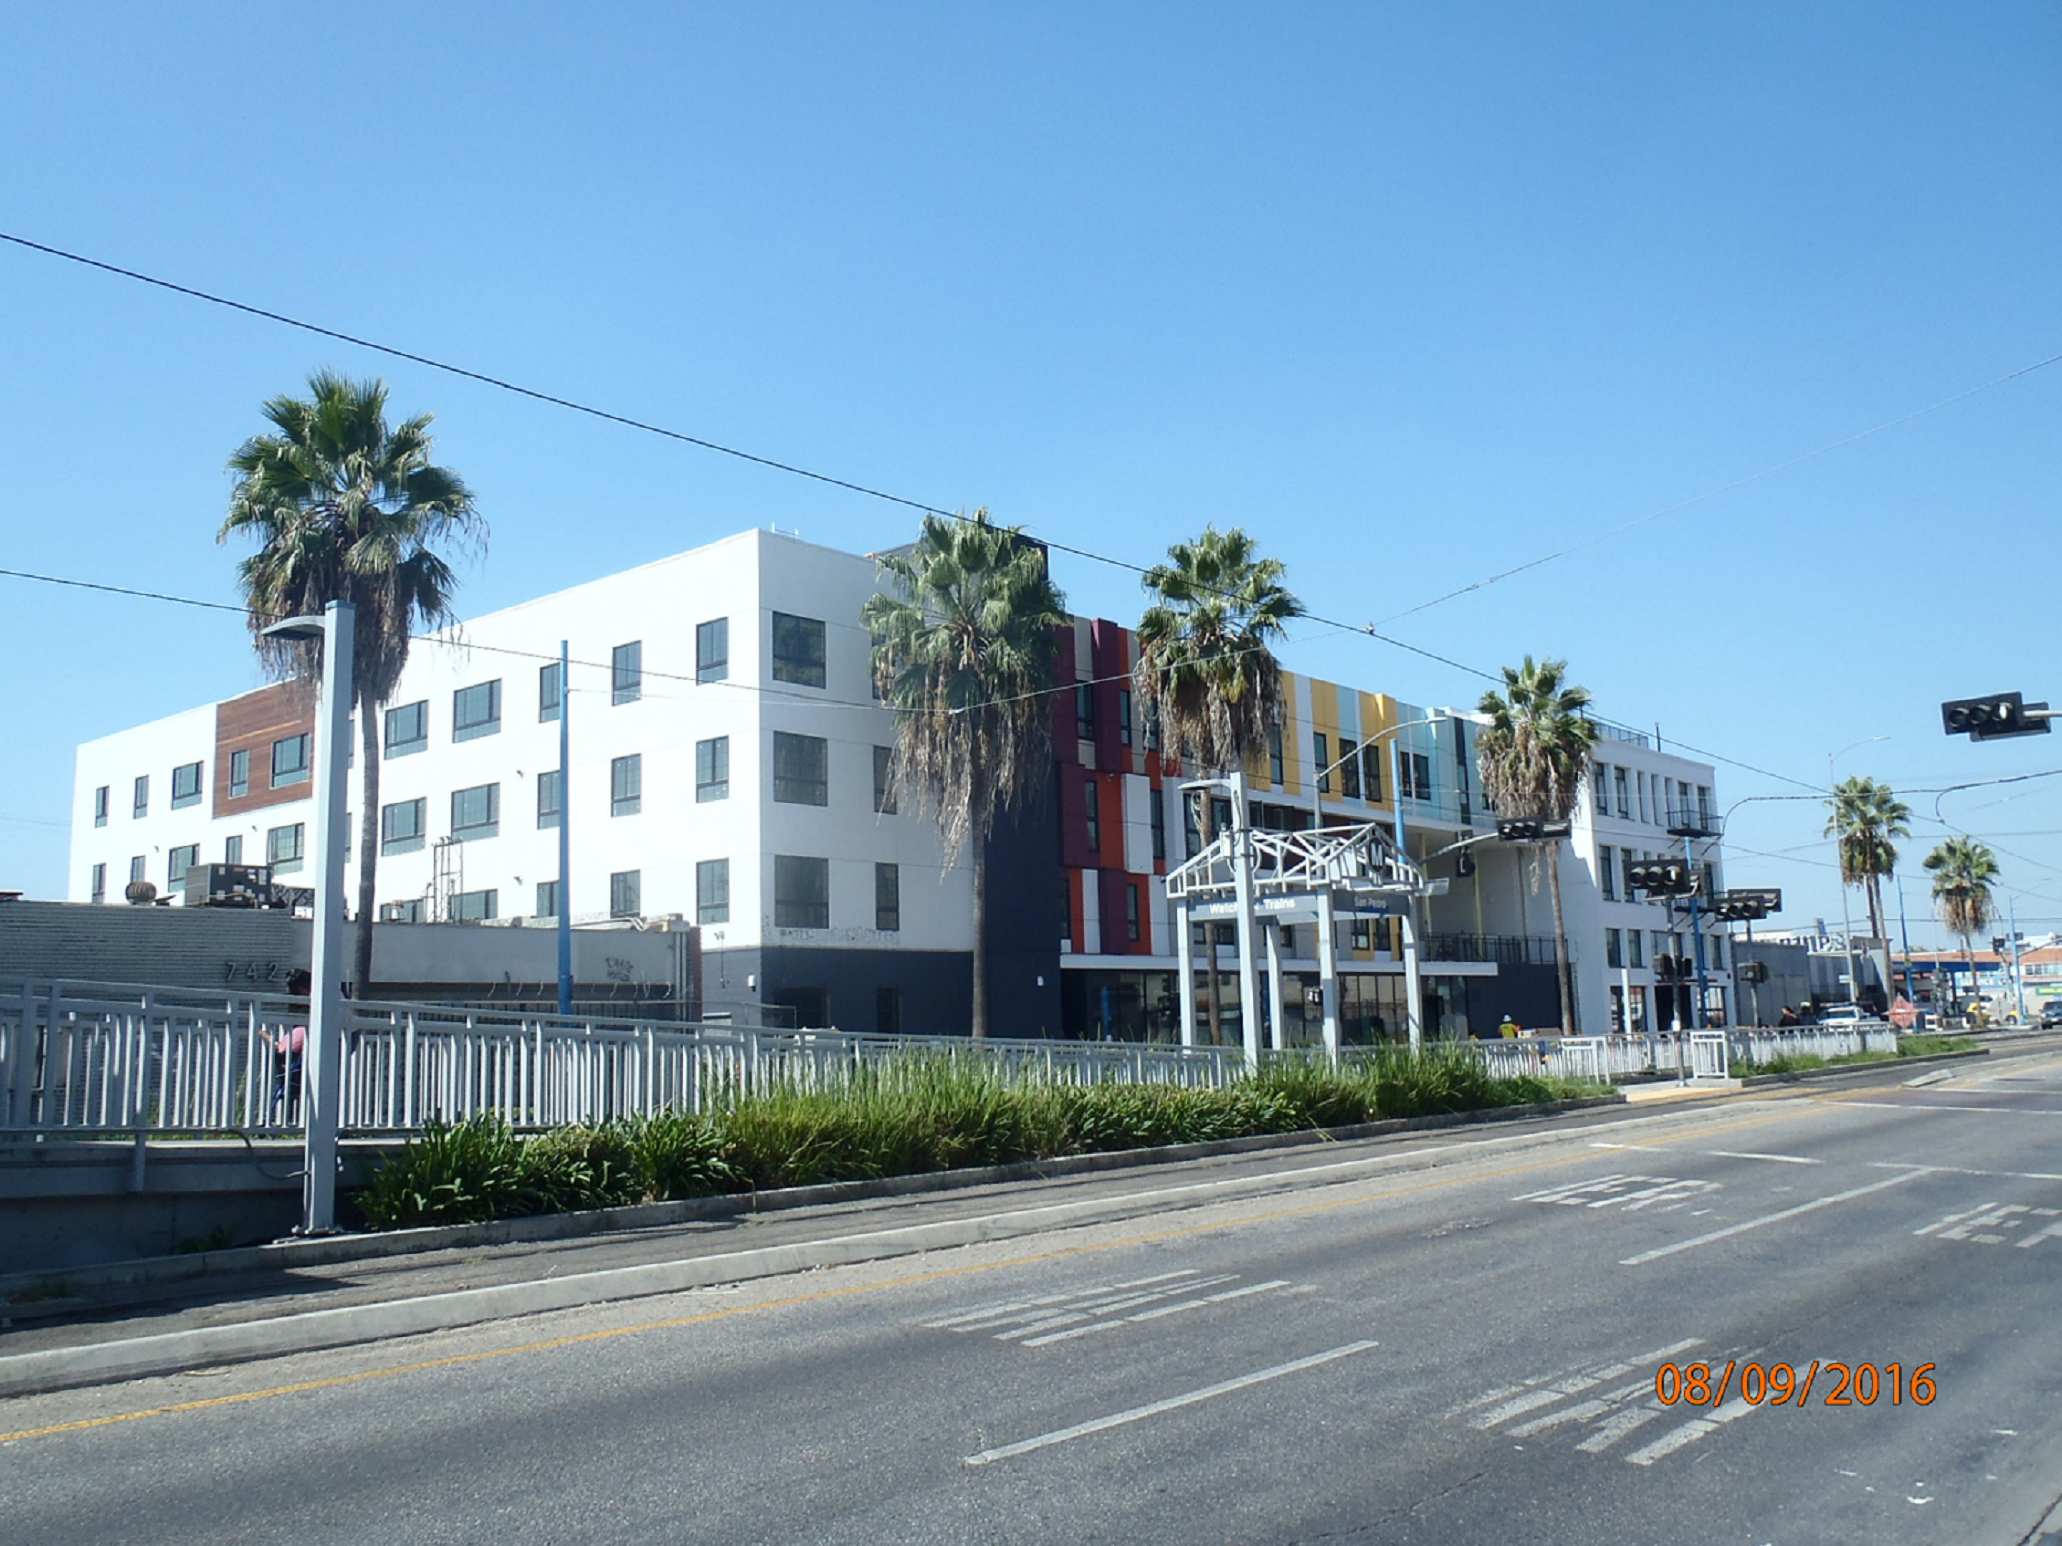 Four story white modern building with small stripes of red and yellow. Building is adjacent to a metrolink station. Entry way is ground level with tall windows. There are palm trees on the sidewalk in front of the building.